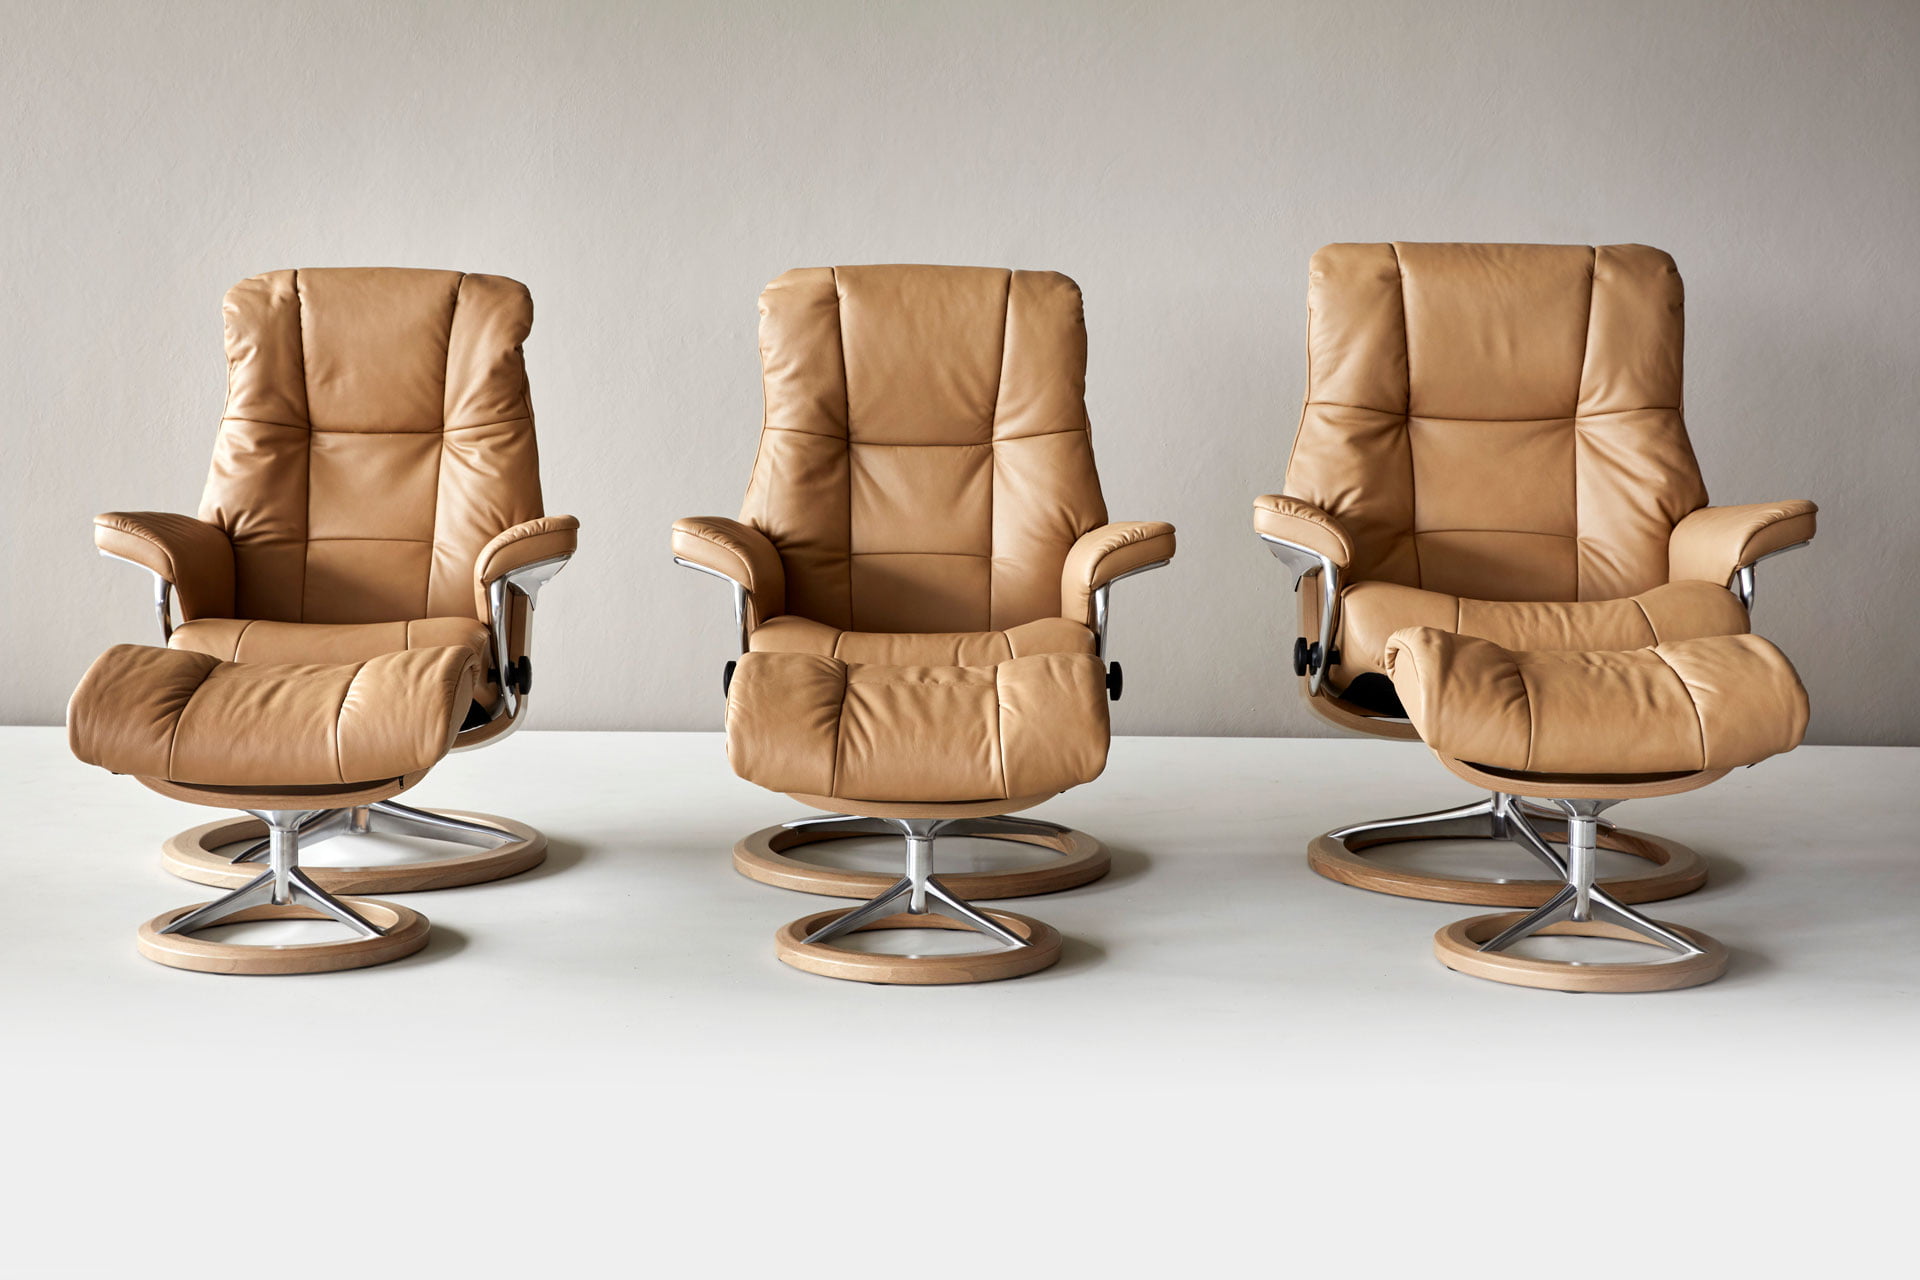 Stressless® Mayfair in three sizes: S, M and L